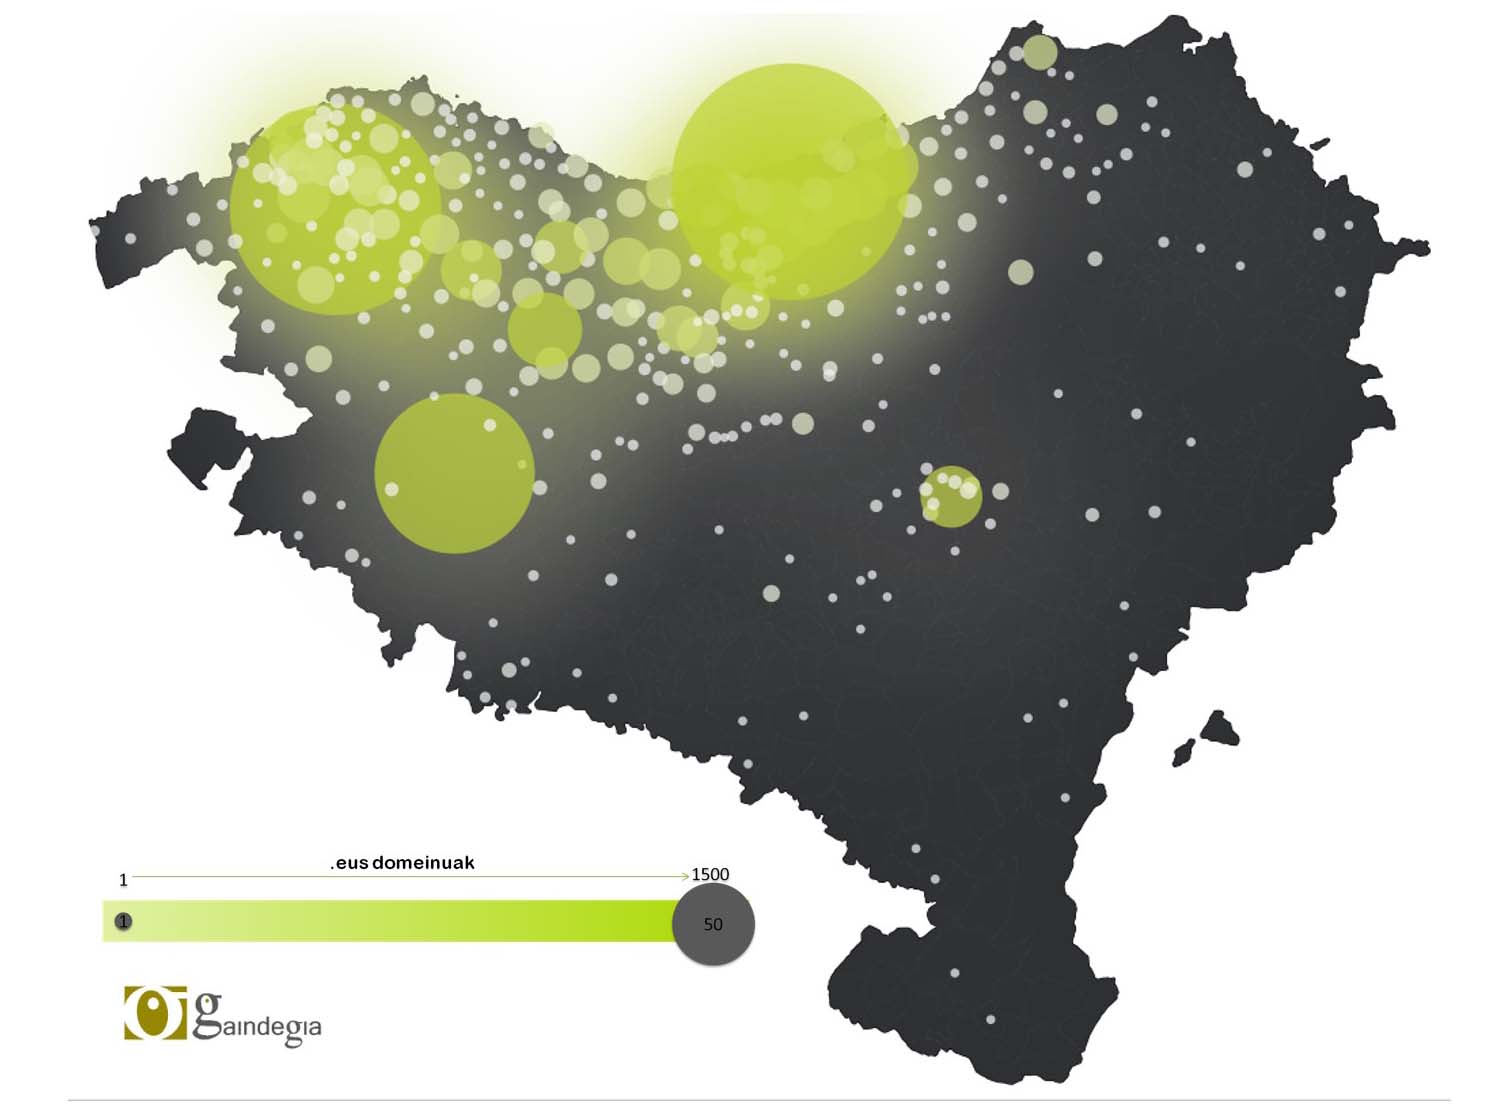 Map that displays the density of .EUS domains in the Basque Country in 2017